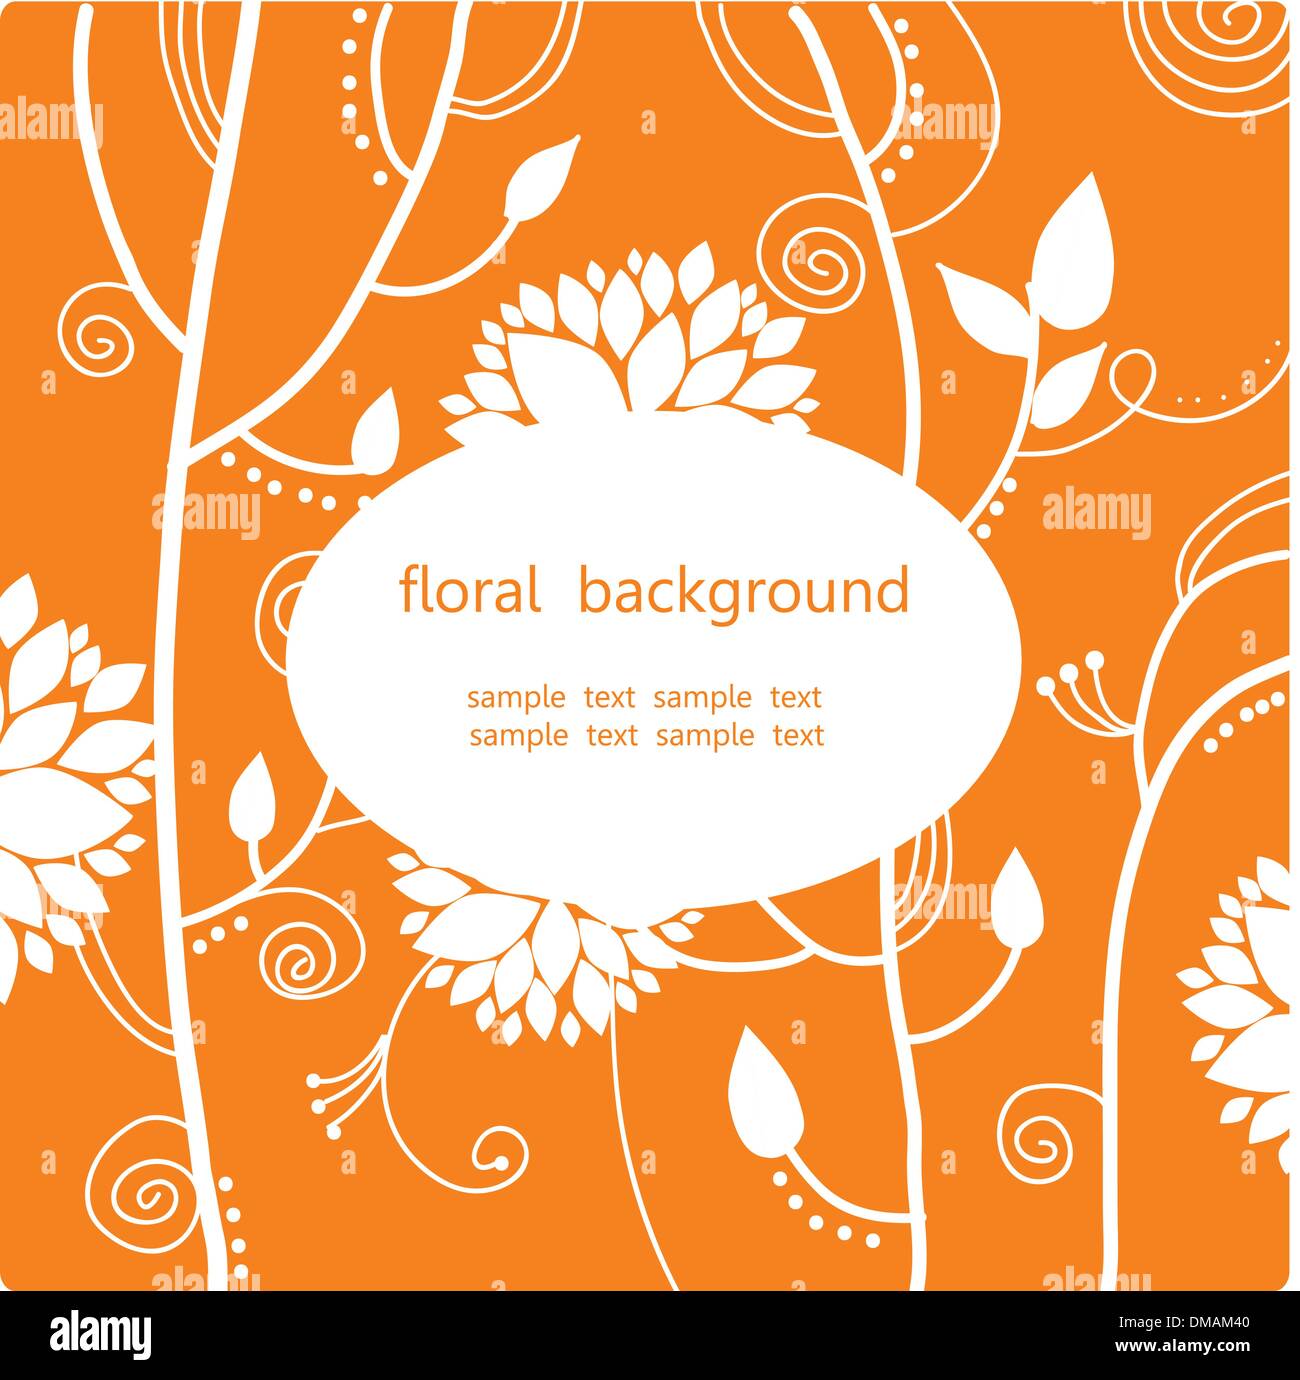 floral background Stock Vector